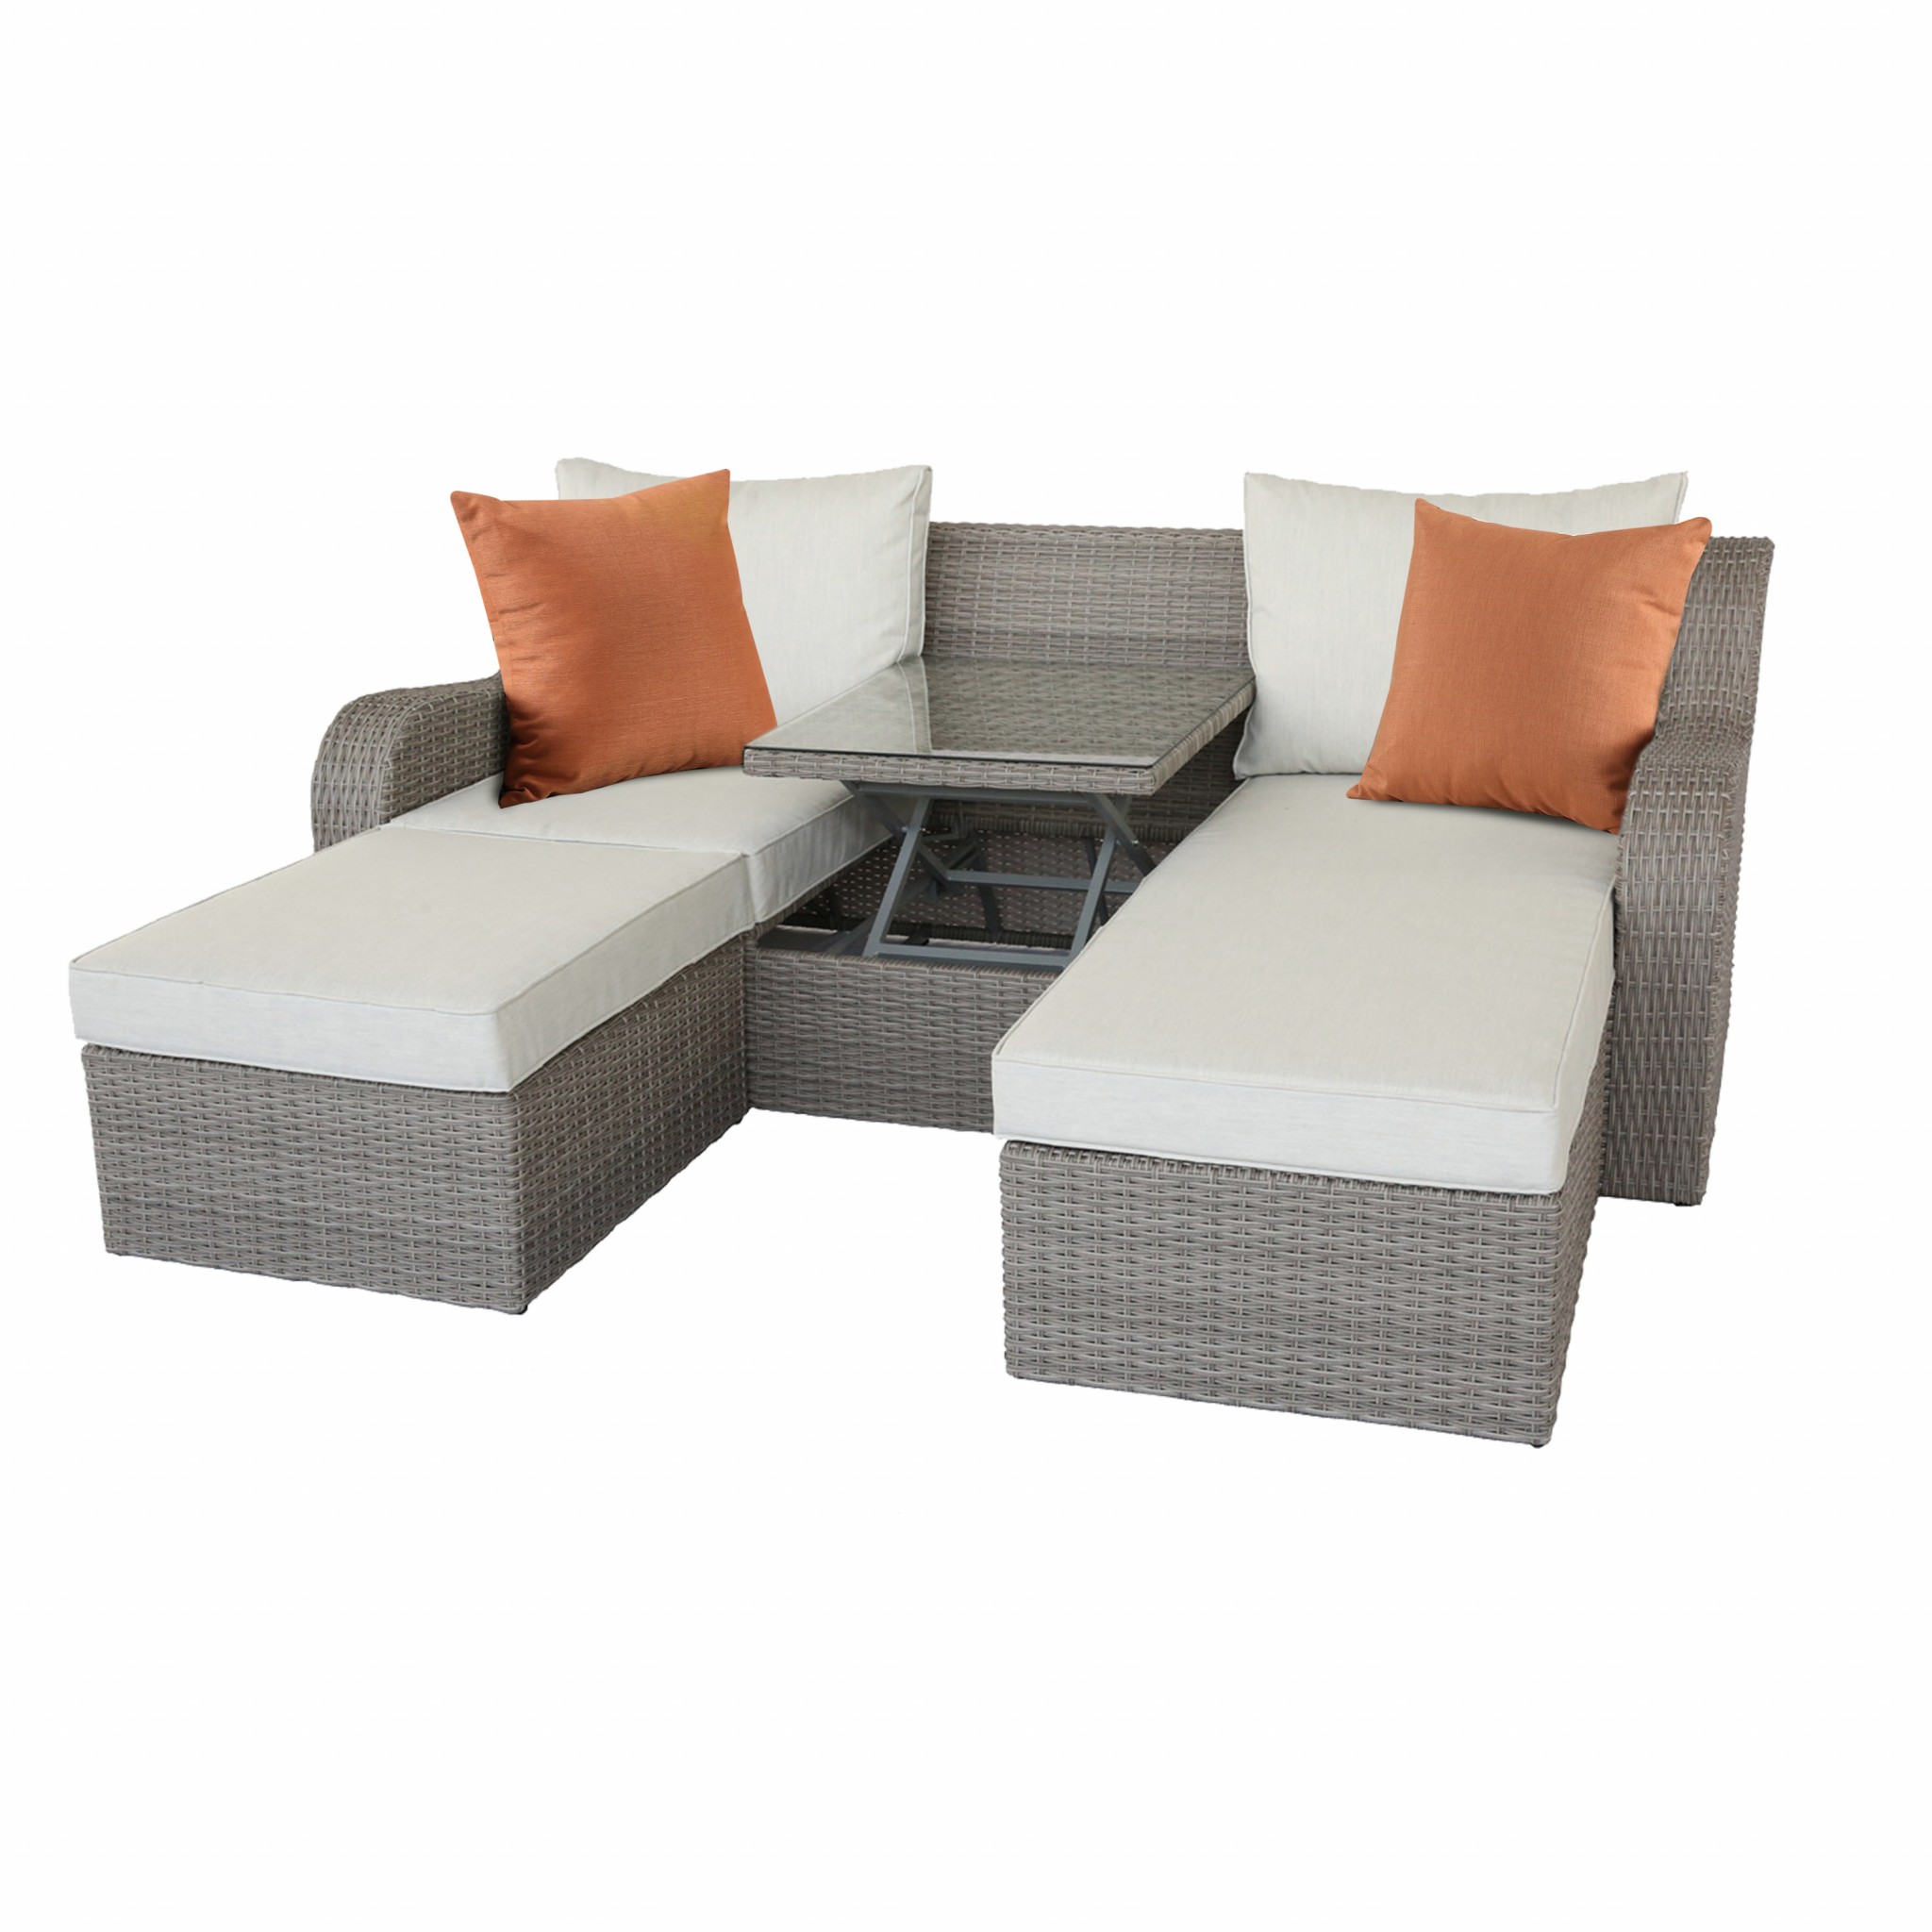 82" X 36" X 30" 3Pc Beige Fabric And Gray Wicker Patio Sectional And Ottoman Set